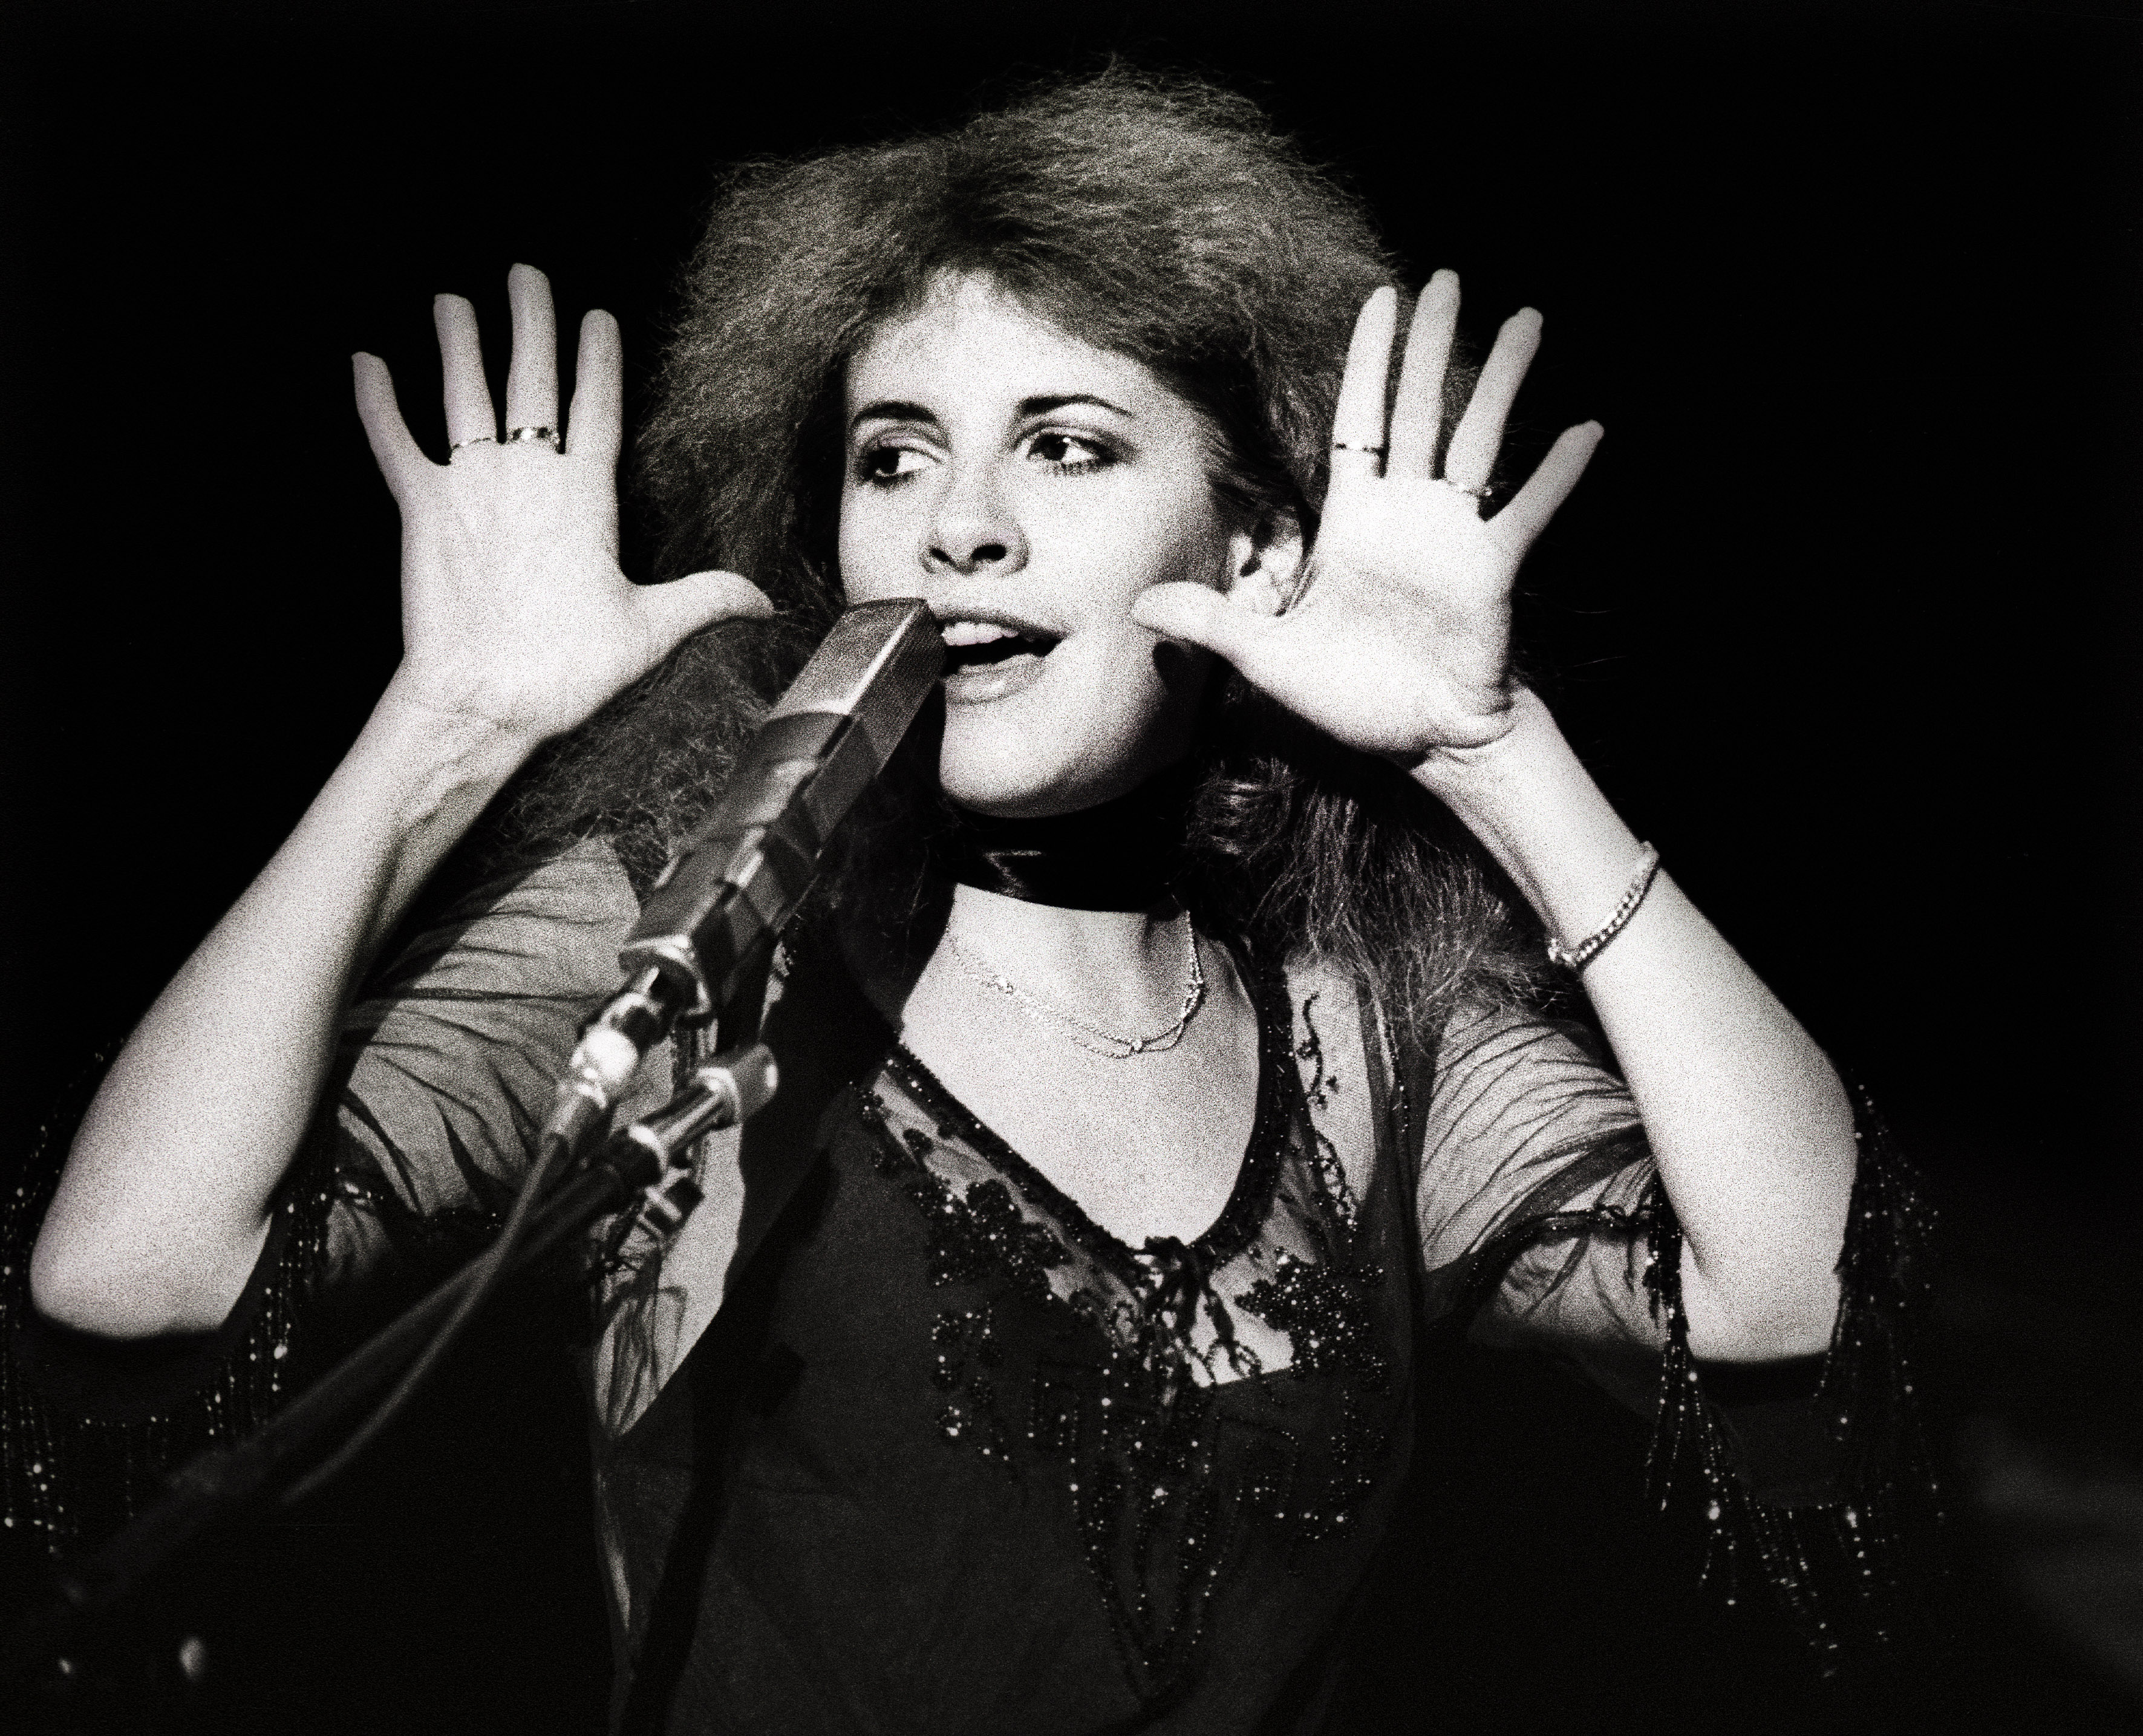 A black and white photo of Fleetwood Mac's Stevie Nicks wearing a lace shirt. She holds her hands up near her face and stands in front of a microphone.